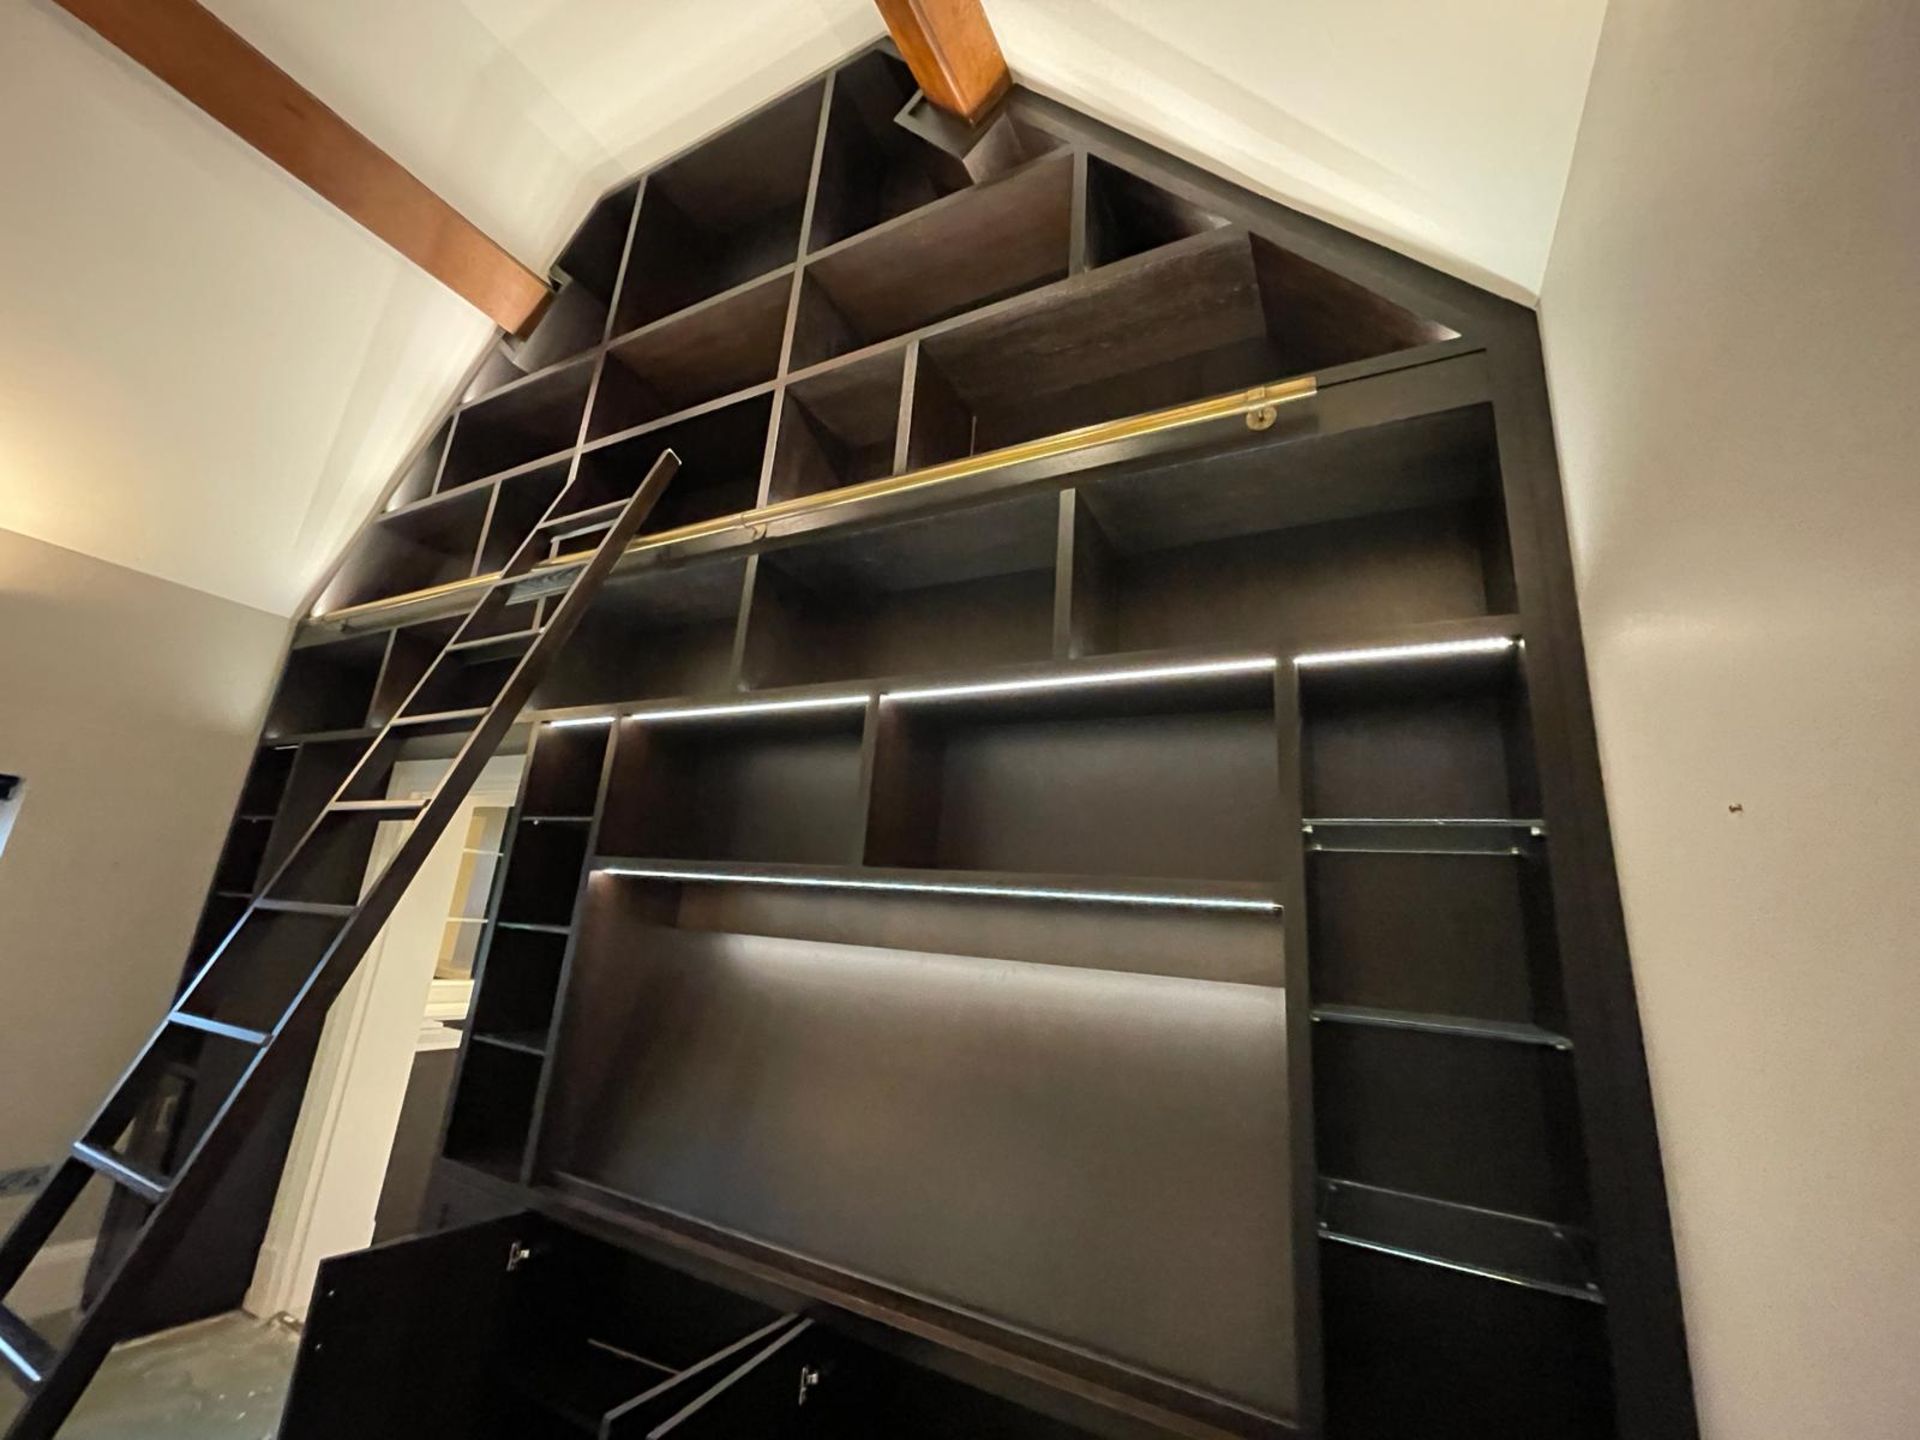 1 x Bespoke 4.7-Metre Wide Fitted Luxury Home Library Solid Wood Bookcase Wall Storage - Image 15 of 23